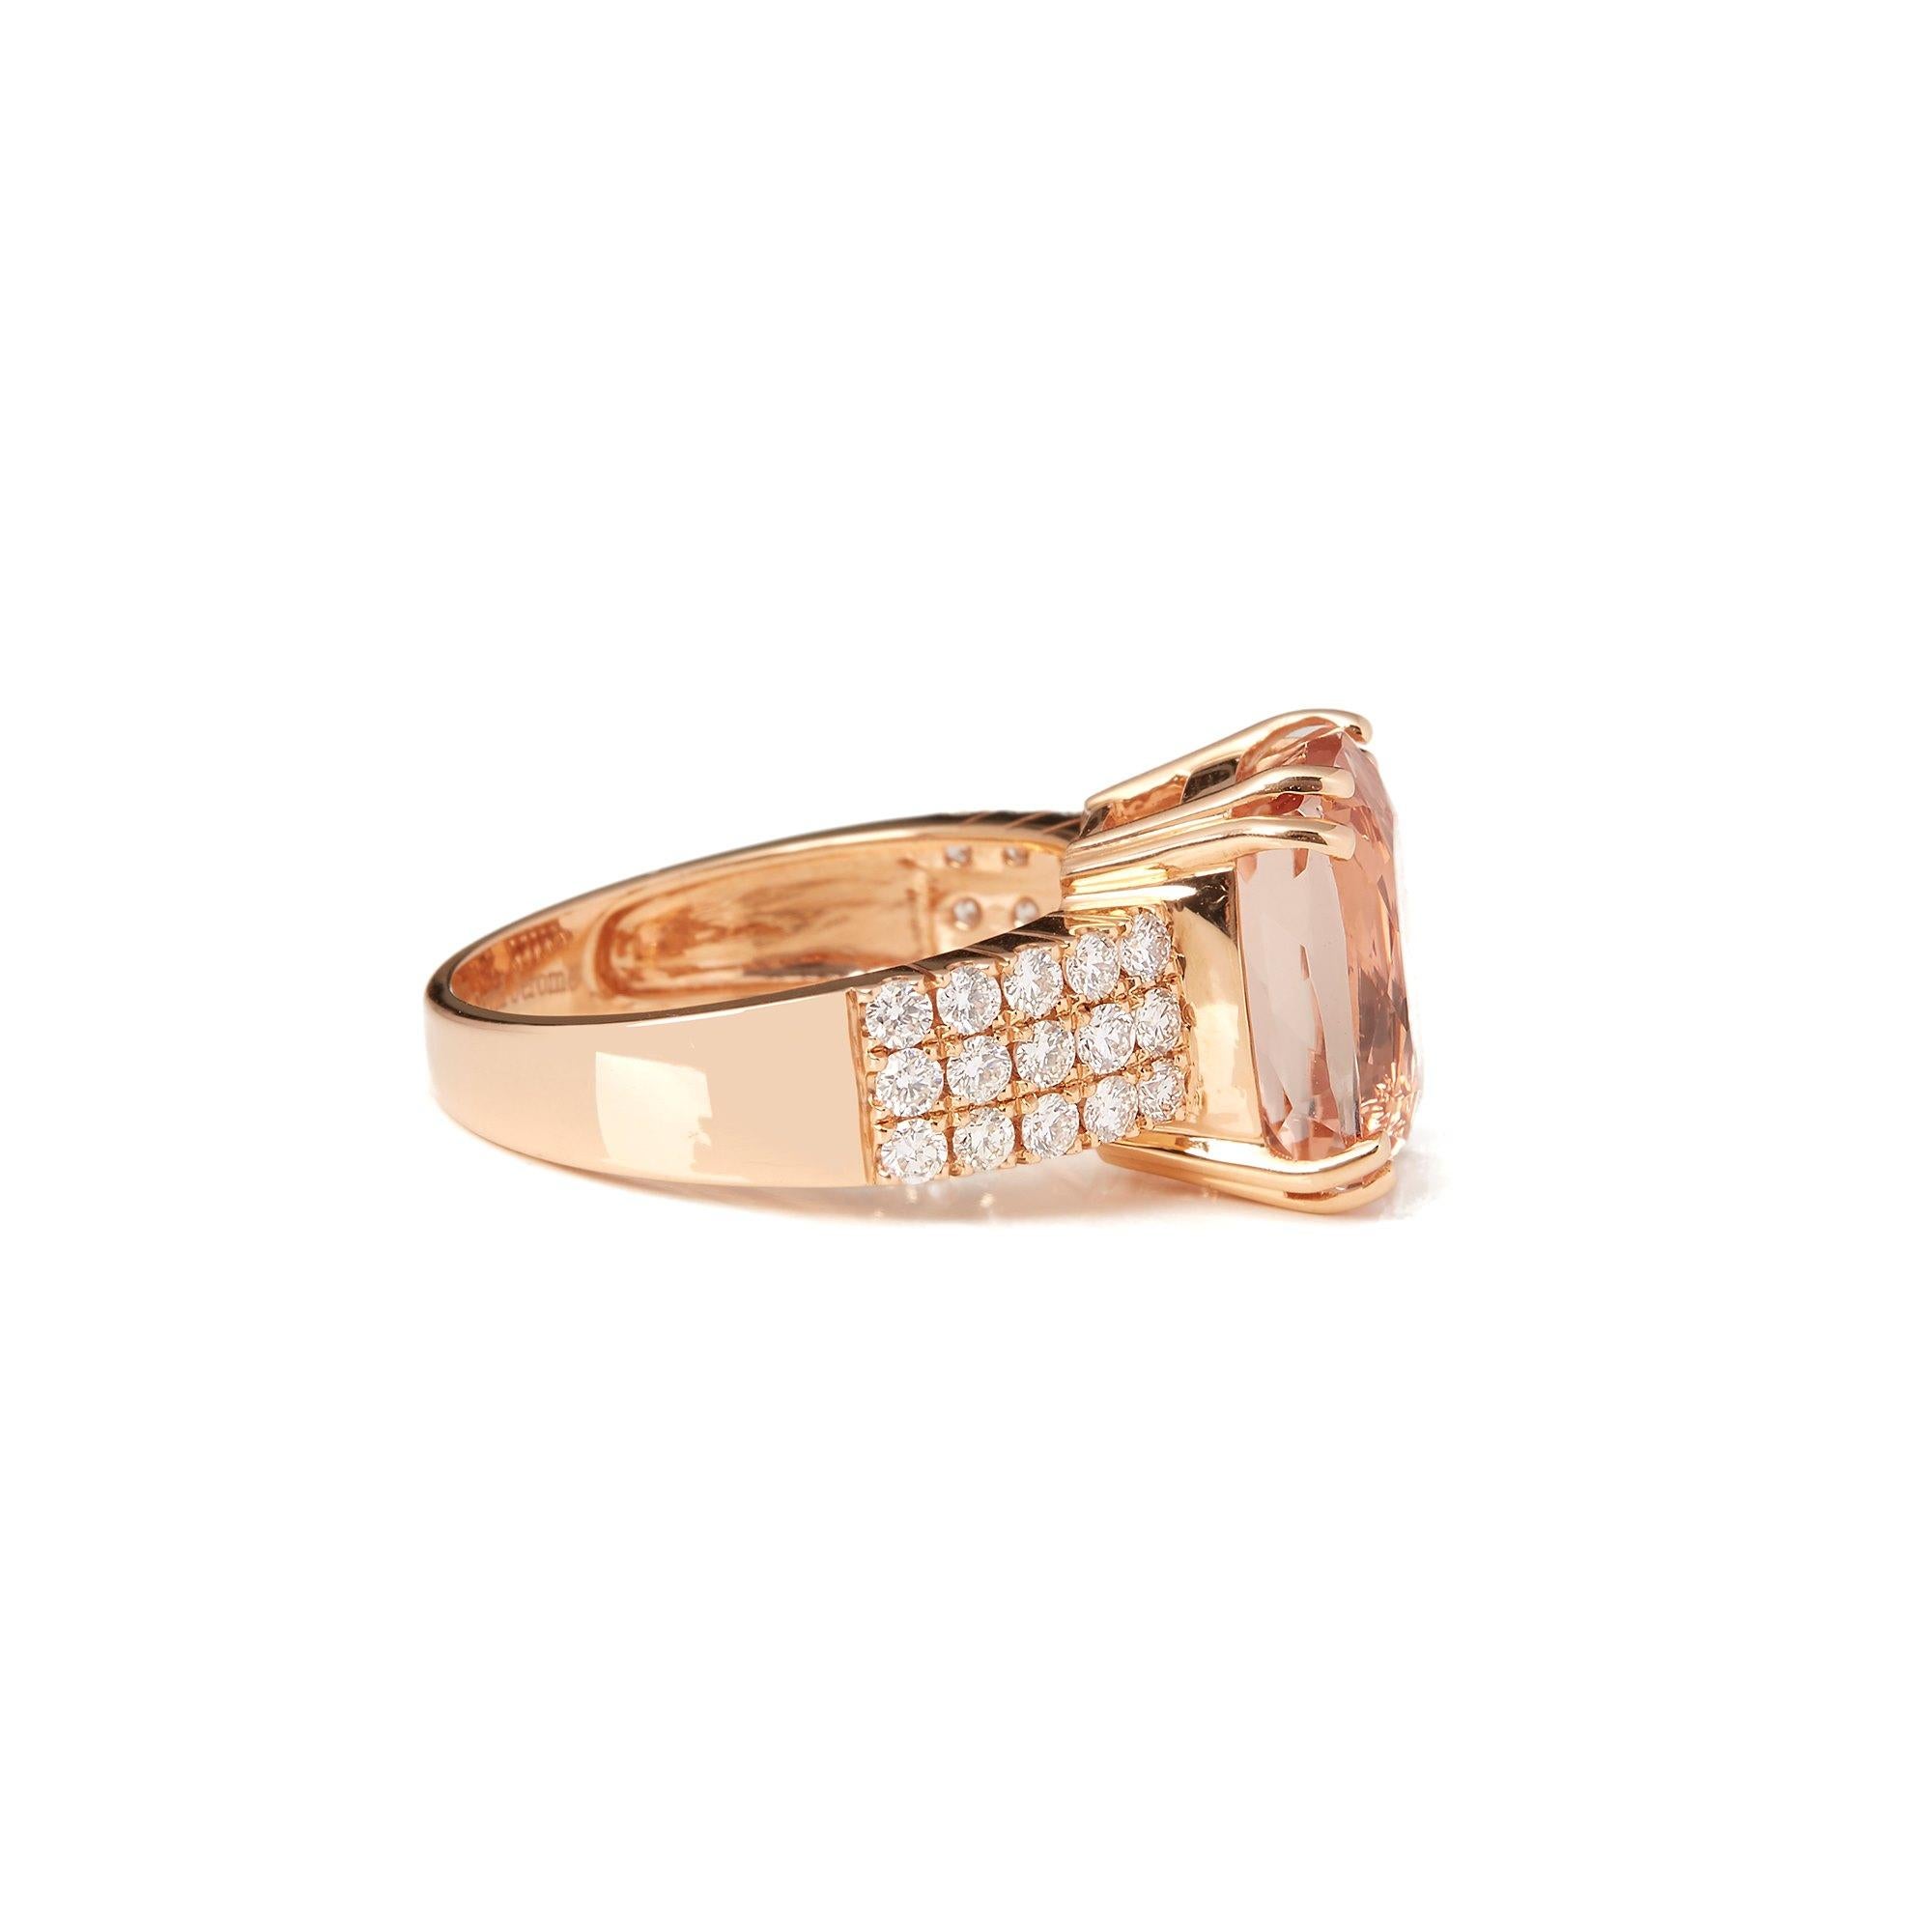 This Ring Designed by David Jerome is from his Private Collection and features One Cushion Cut Morganite Totalling 7.99cts Sourced in Brazil. Set with Round Brilliant Cut Diamonds Totalling 0.65cts Mounted in an 18k Rose Gold Setting. Finger Size UK